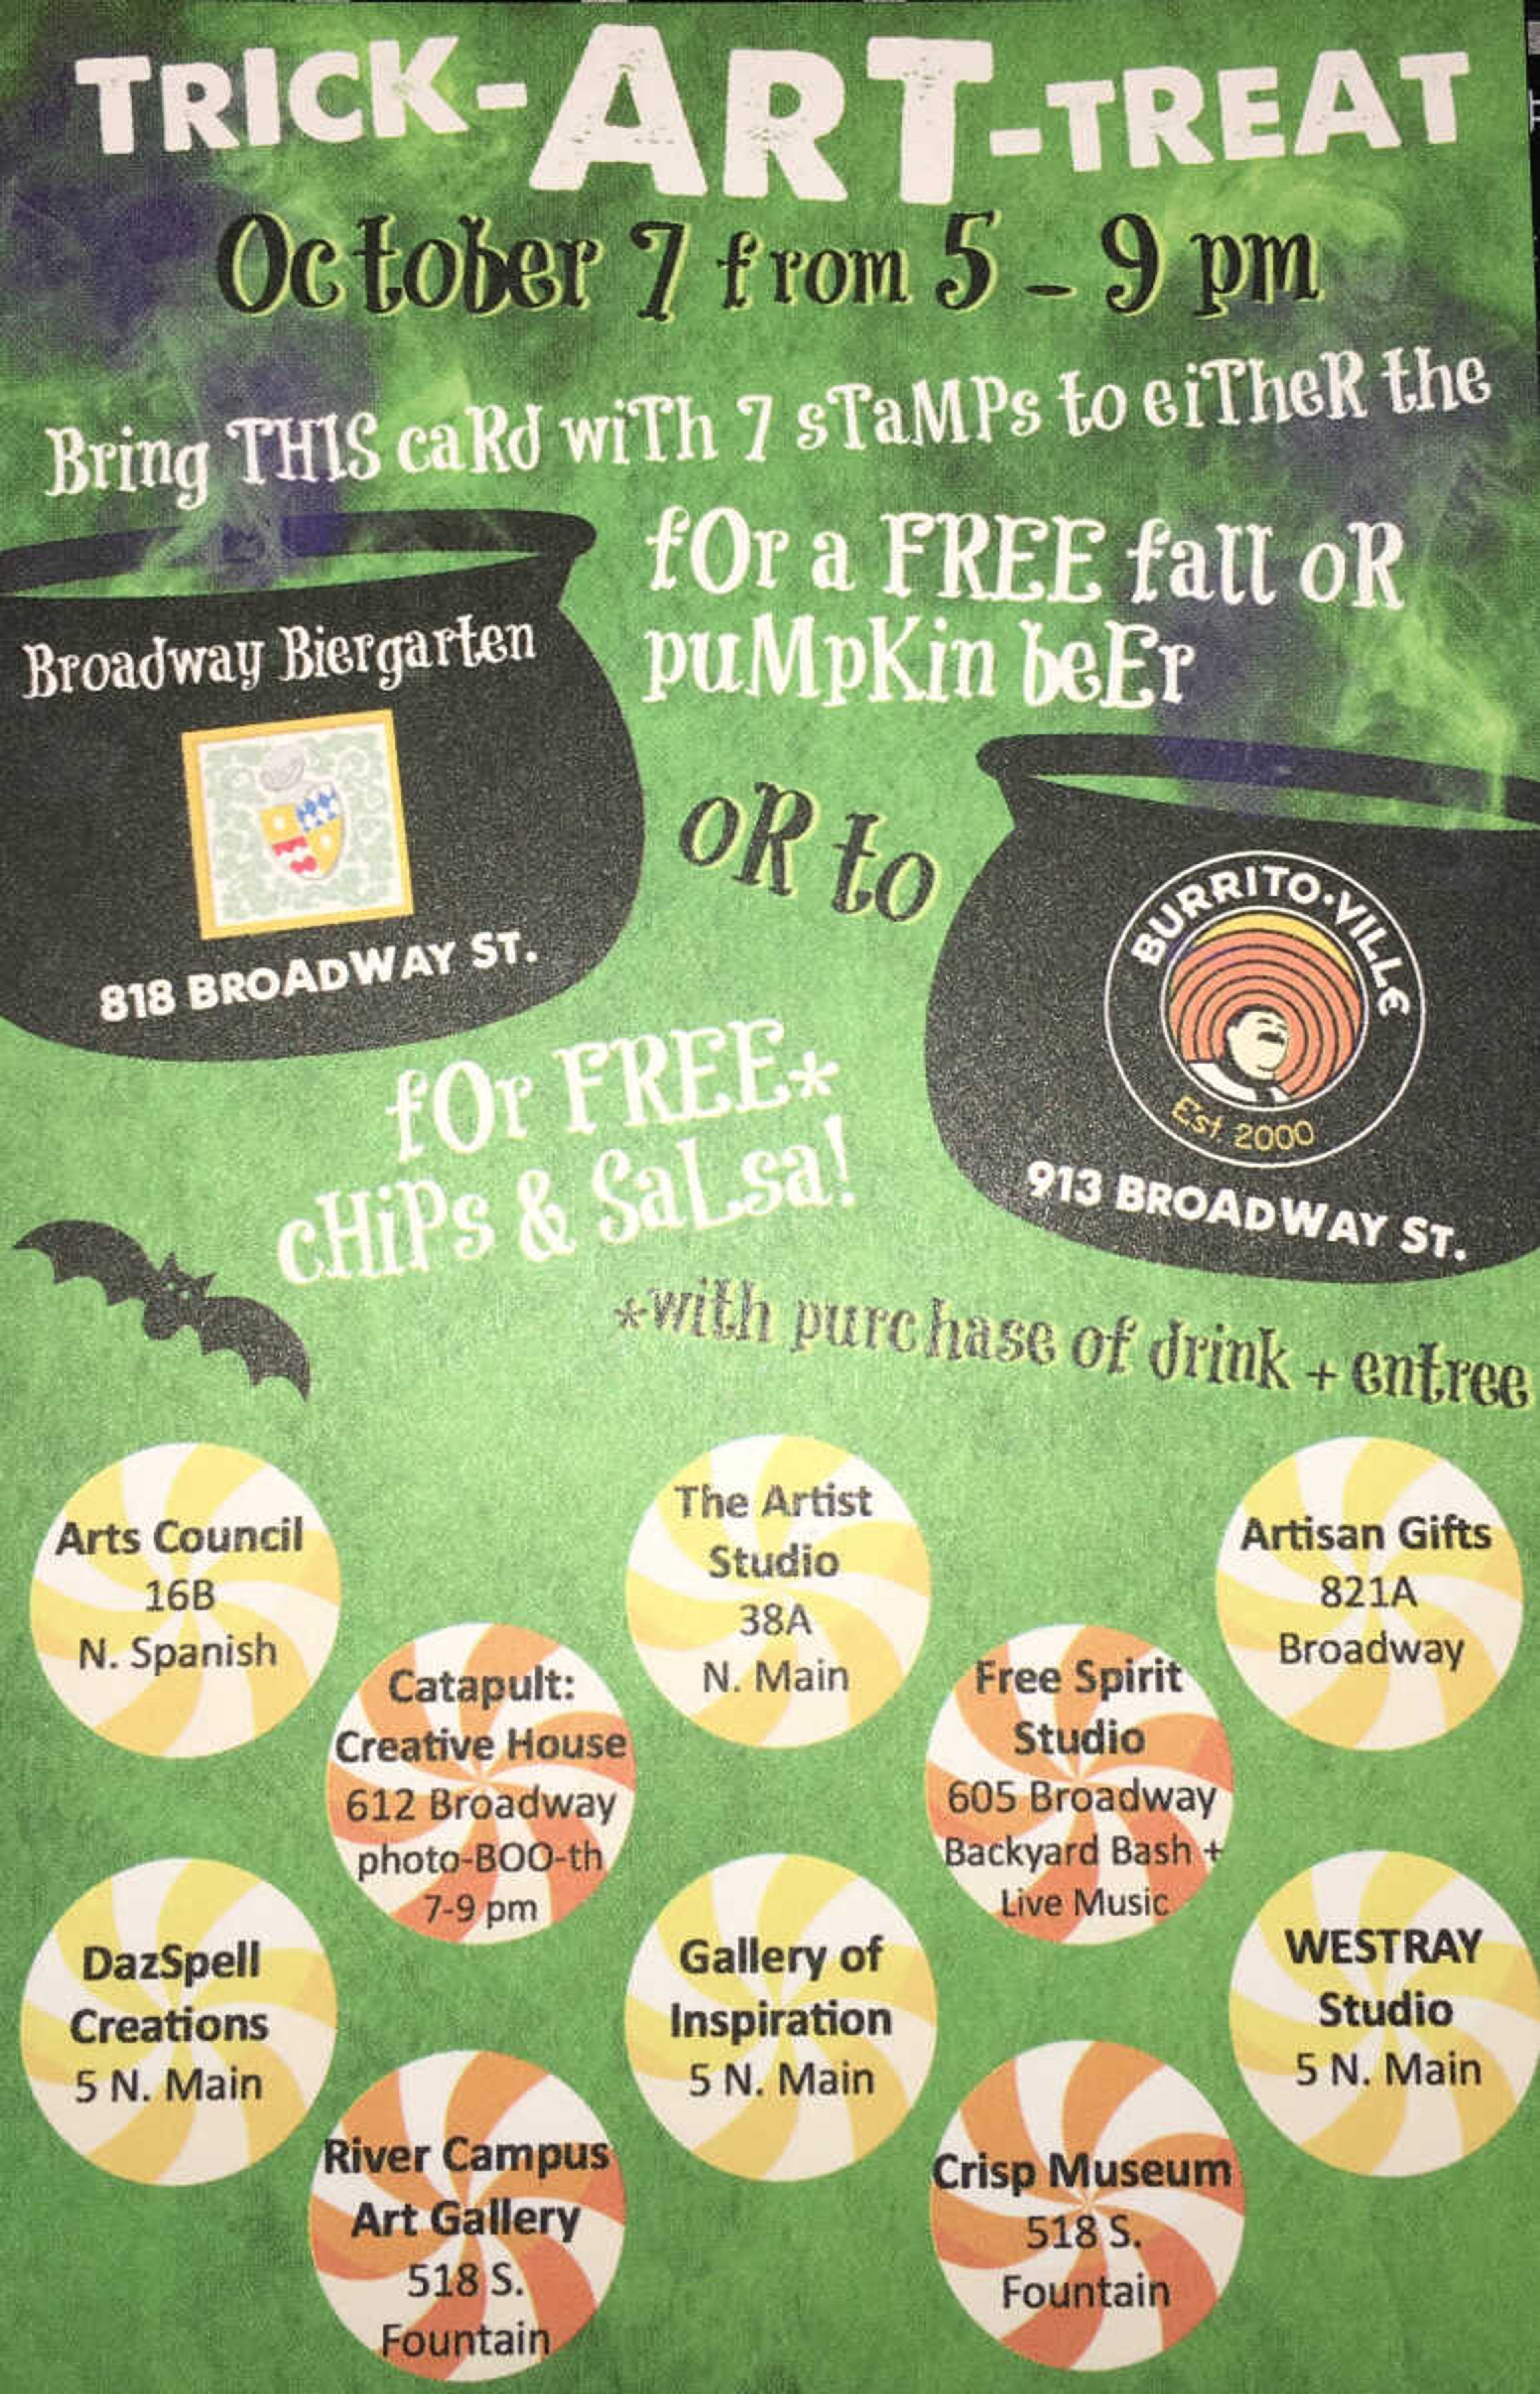 Flyer for Trick-Art-Treat event.